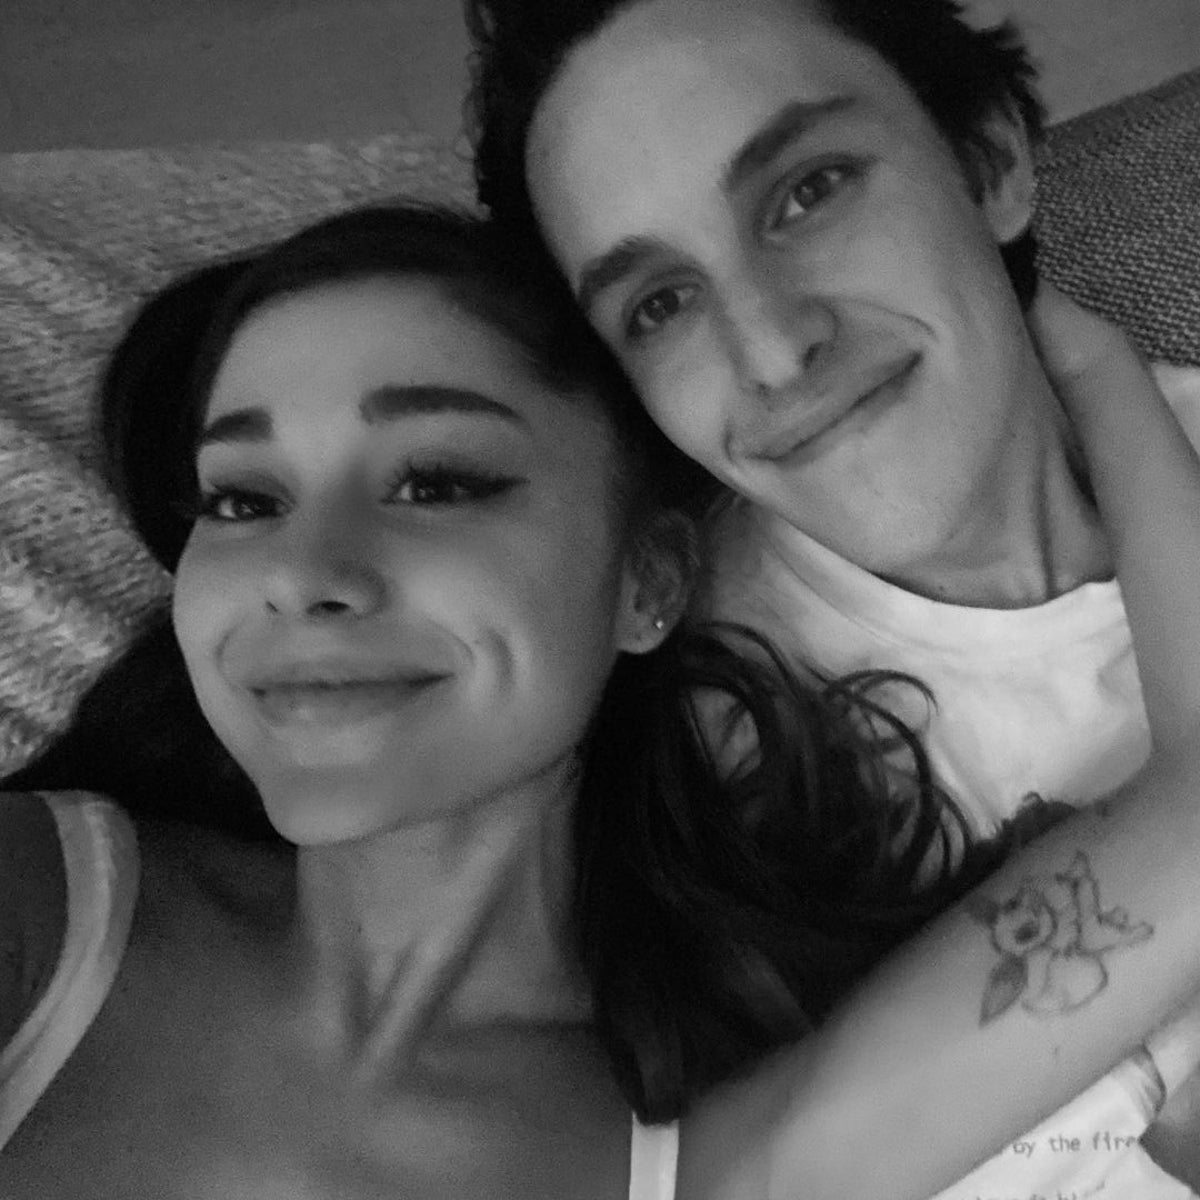 Ariana Grande separates from husband Dalton Gomez after two years of  marriage, Culture